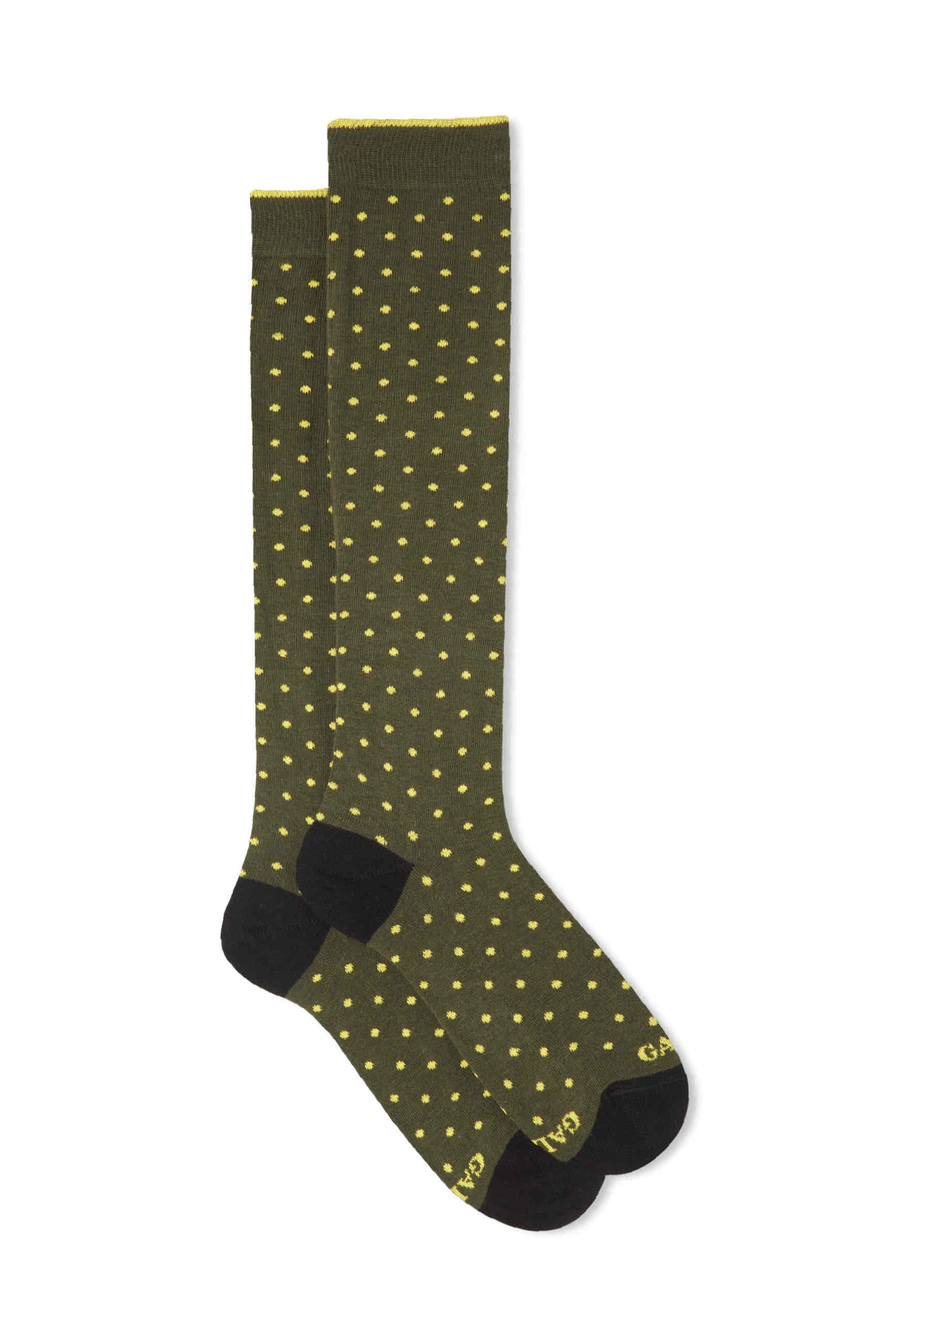 Women's long army cotton socks with polka dots - Gallo 1927 - Official Online Shop